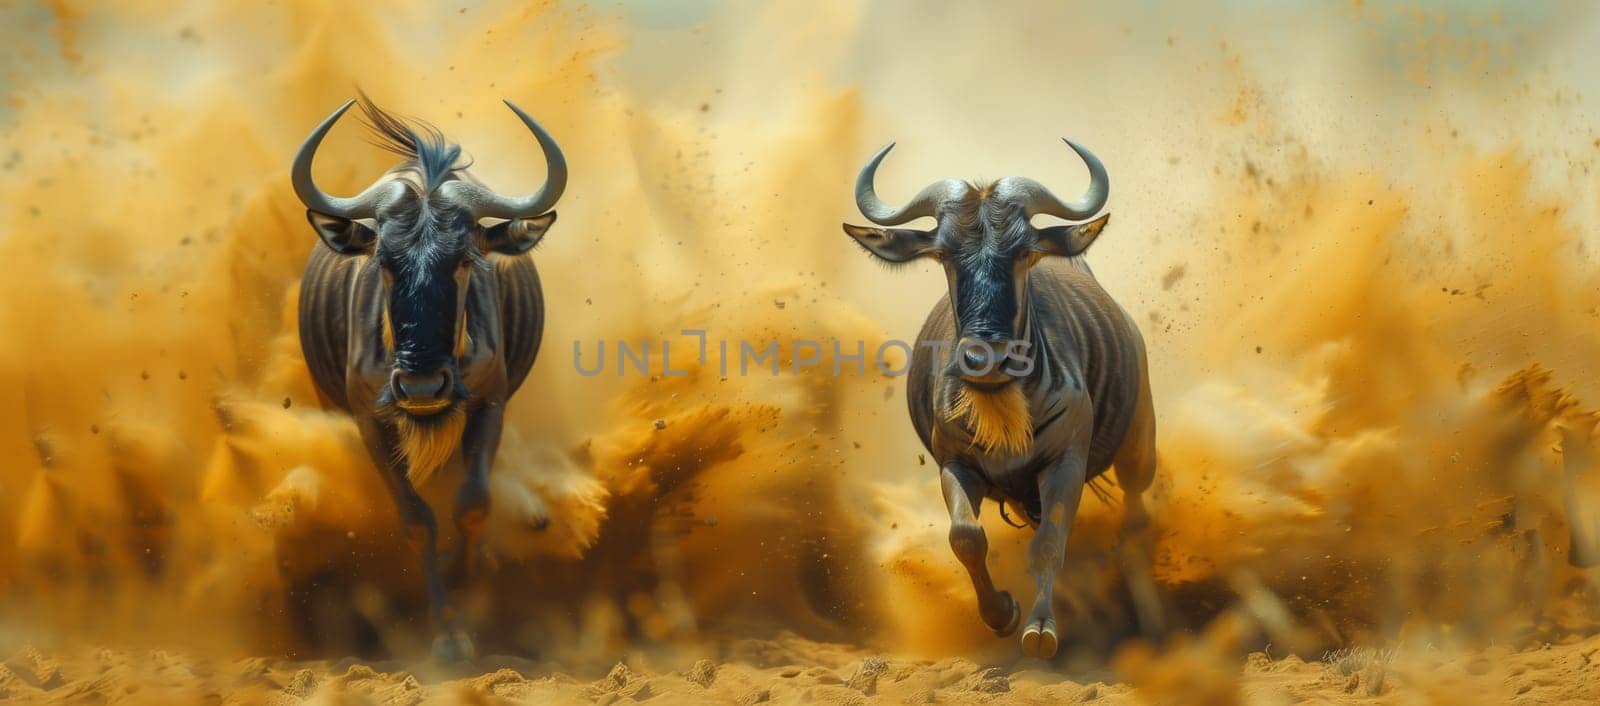 Two wildebeest running in dirt field, iconic bovines on the move by richwolf